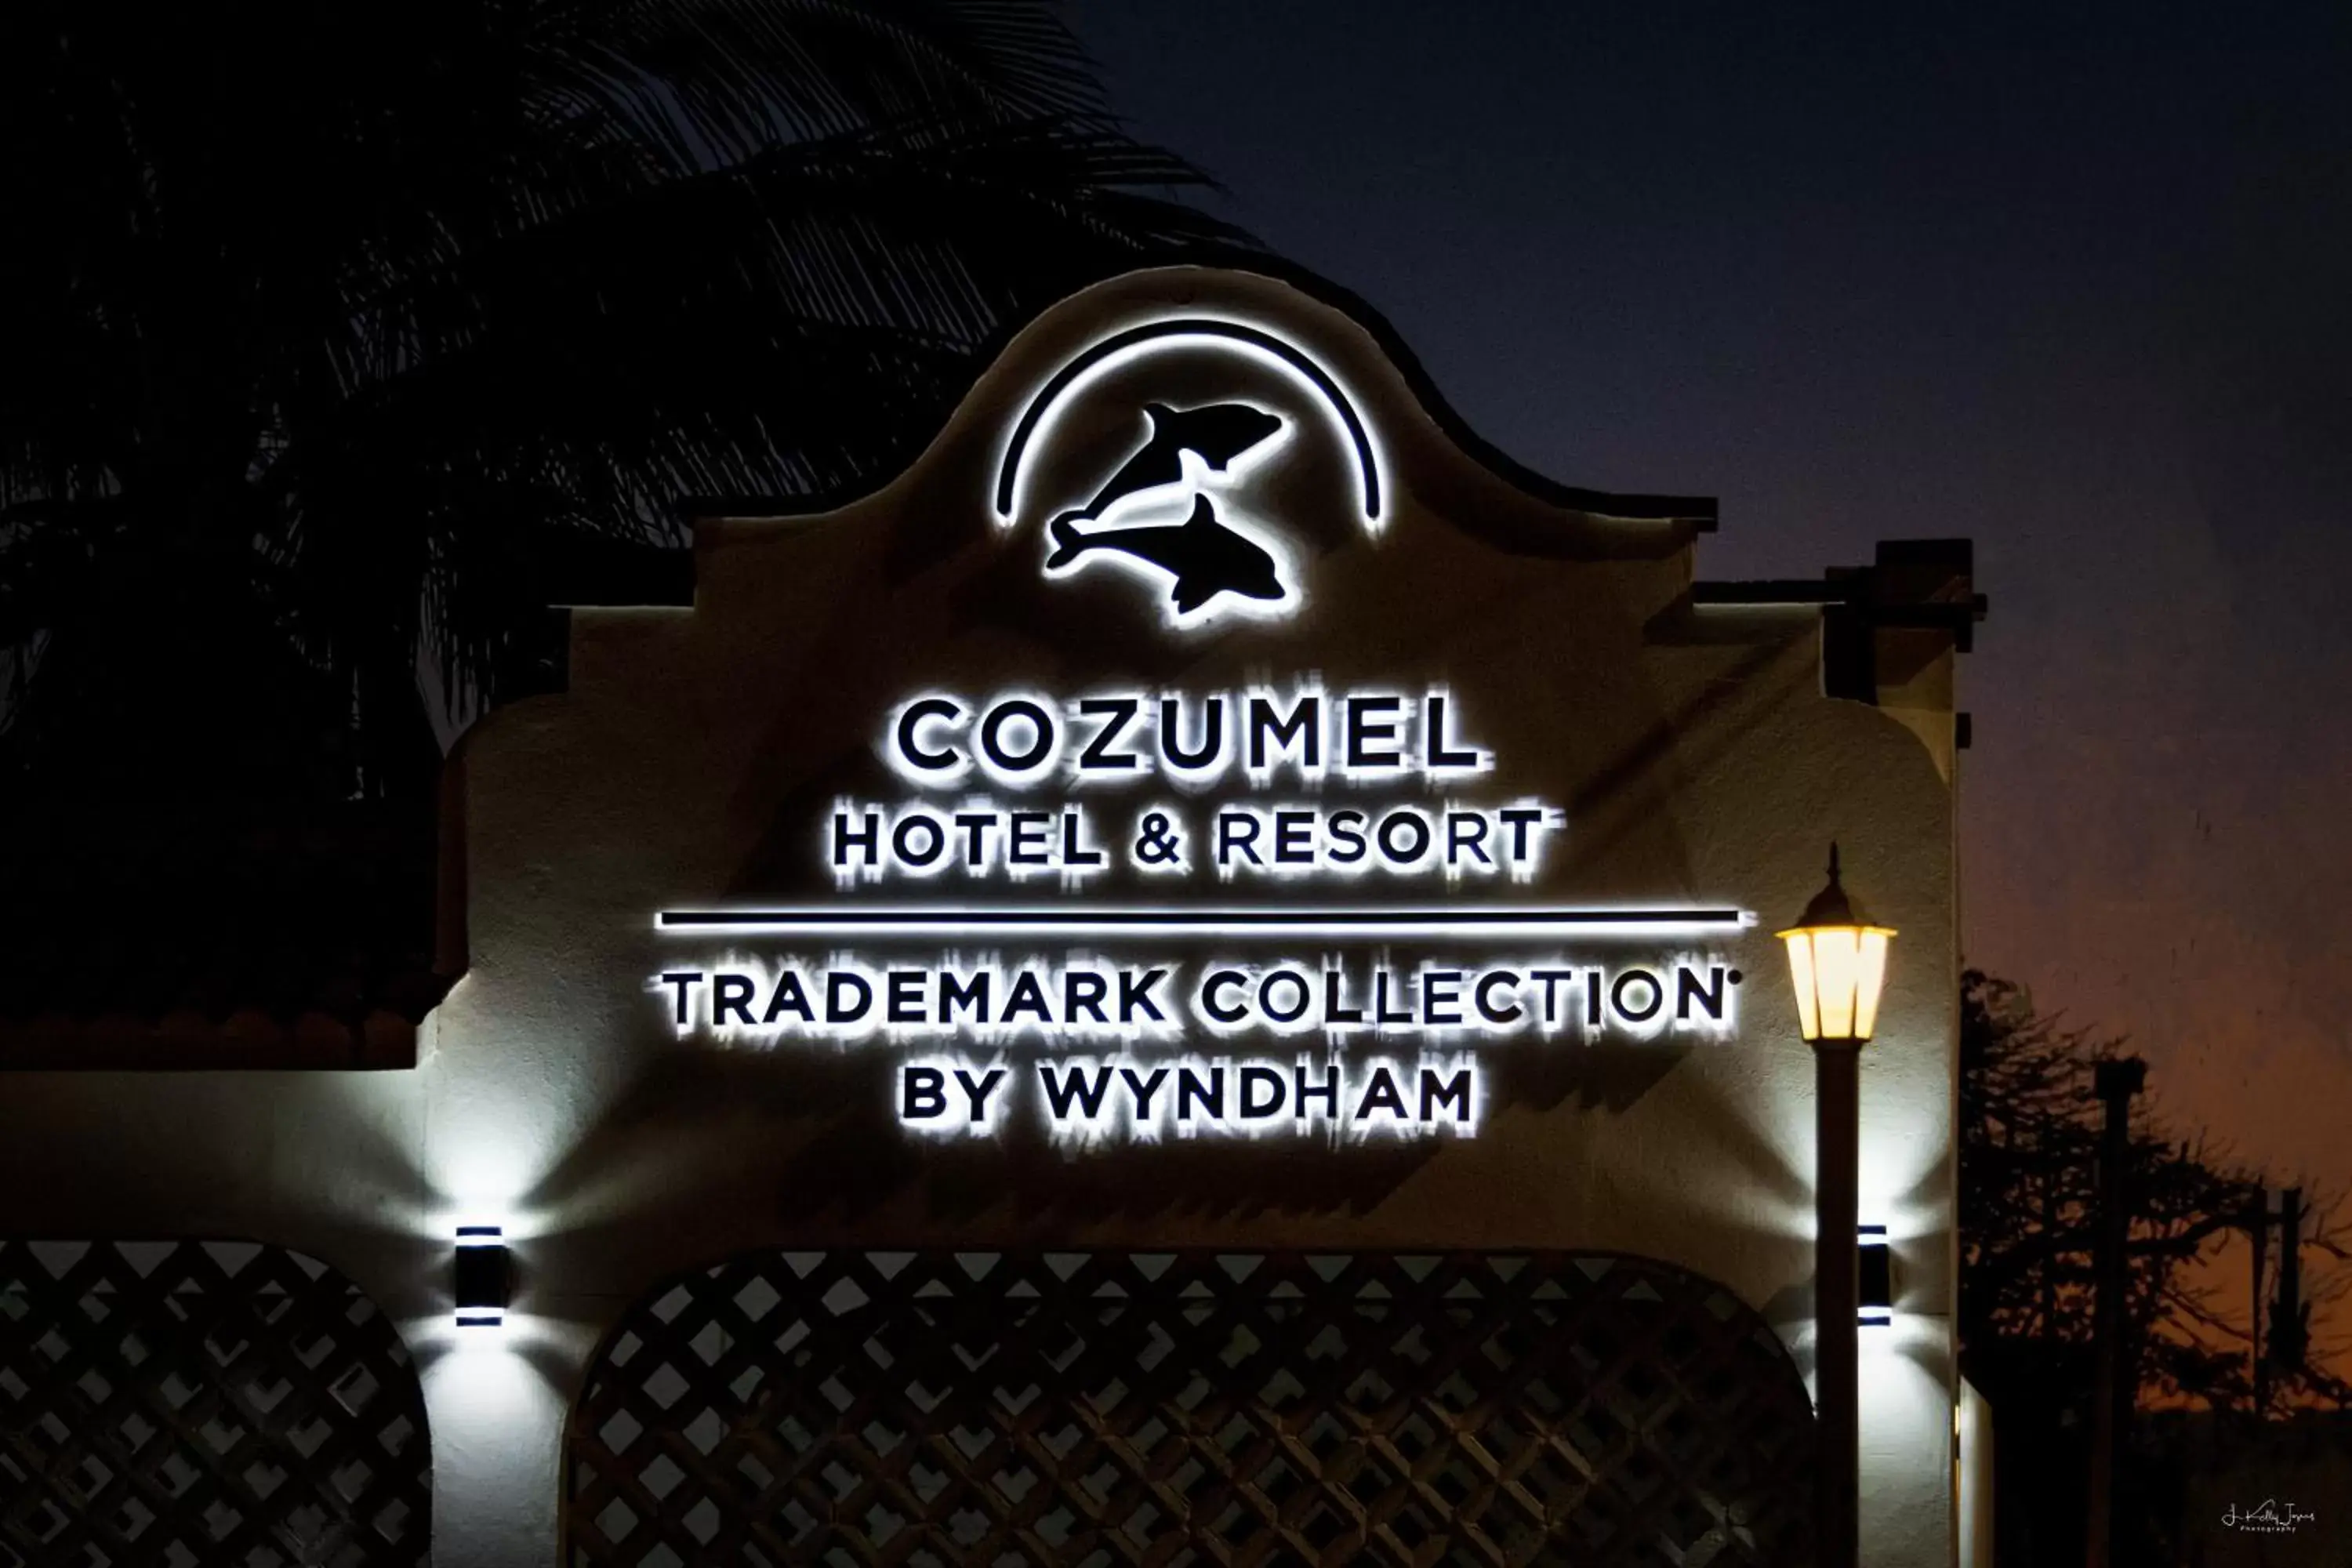 Property building in Cozumel Hotel & Resort Trademark Collection by Wyndham